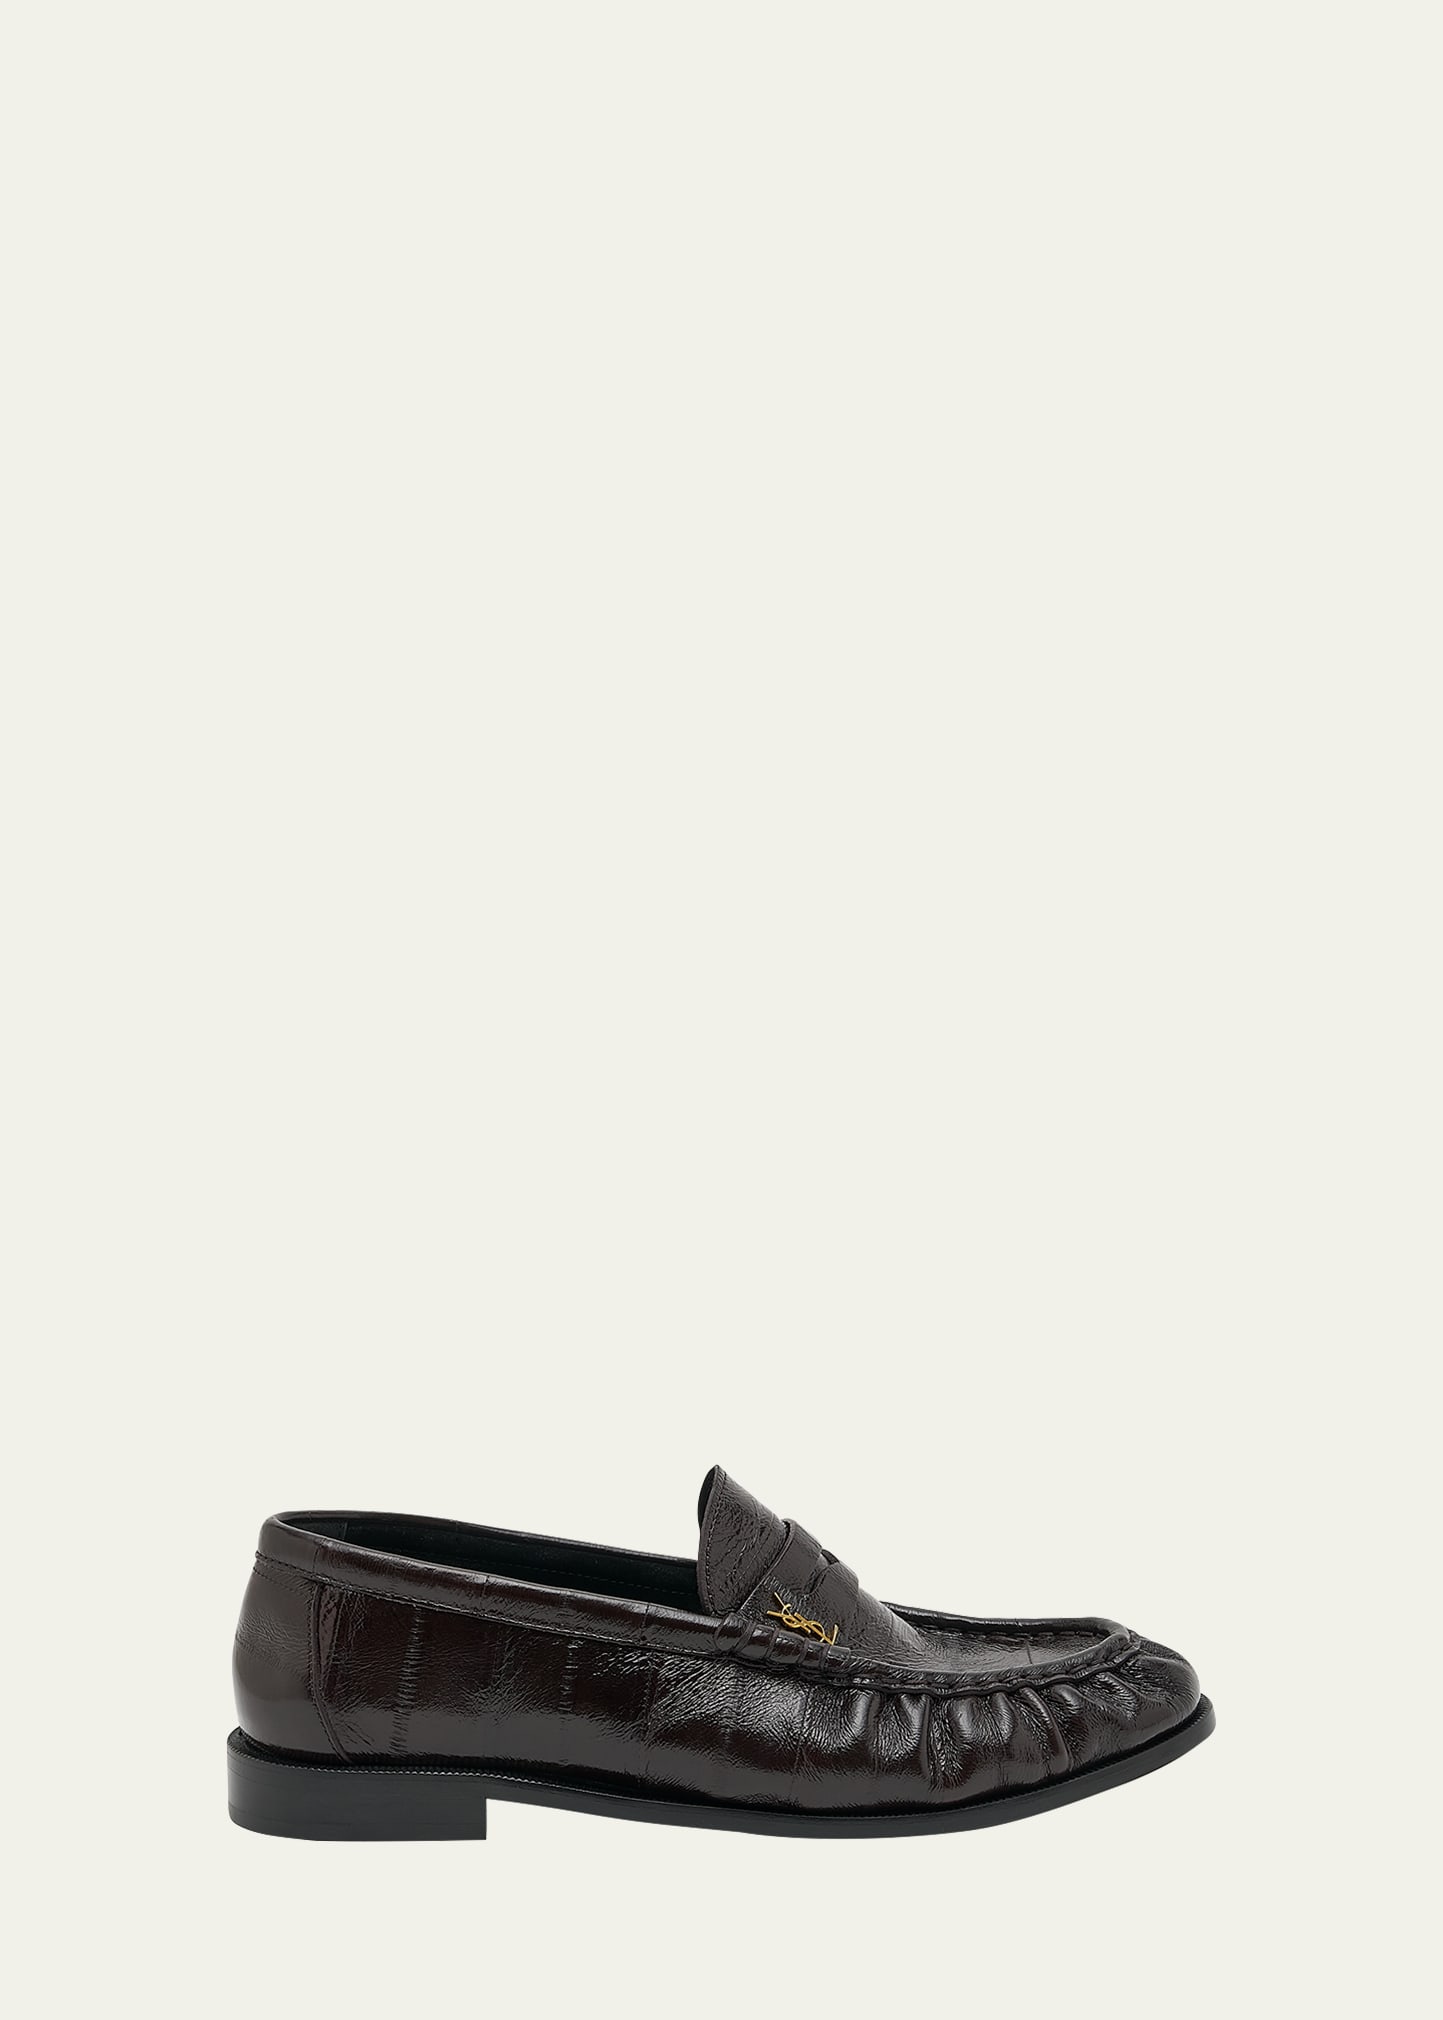 Saint Laurent Le Leather Ysl Penny Loafers In Moka Brown